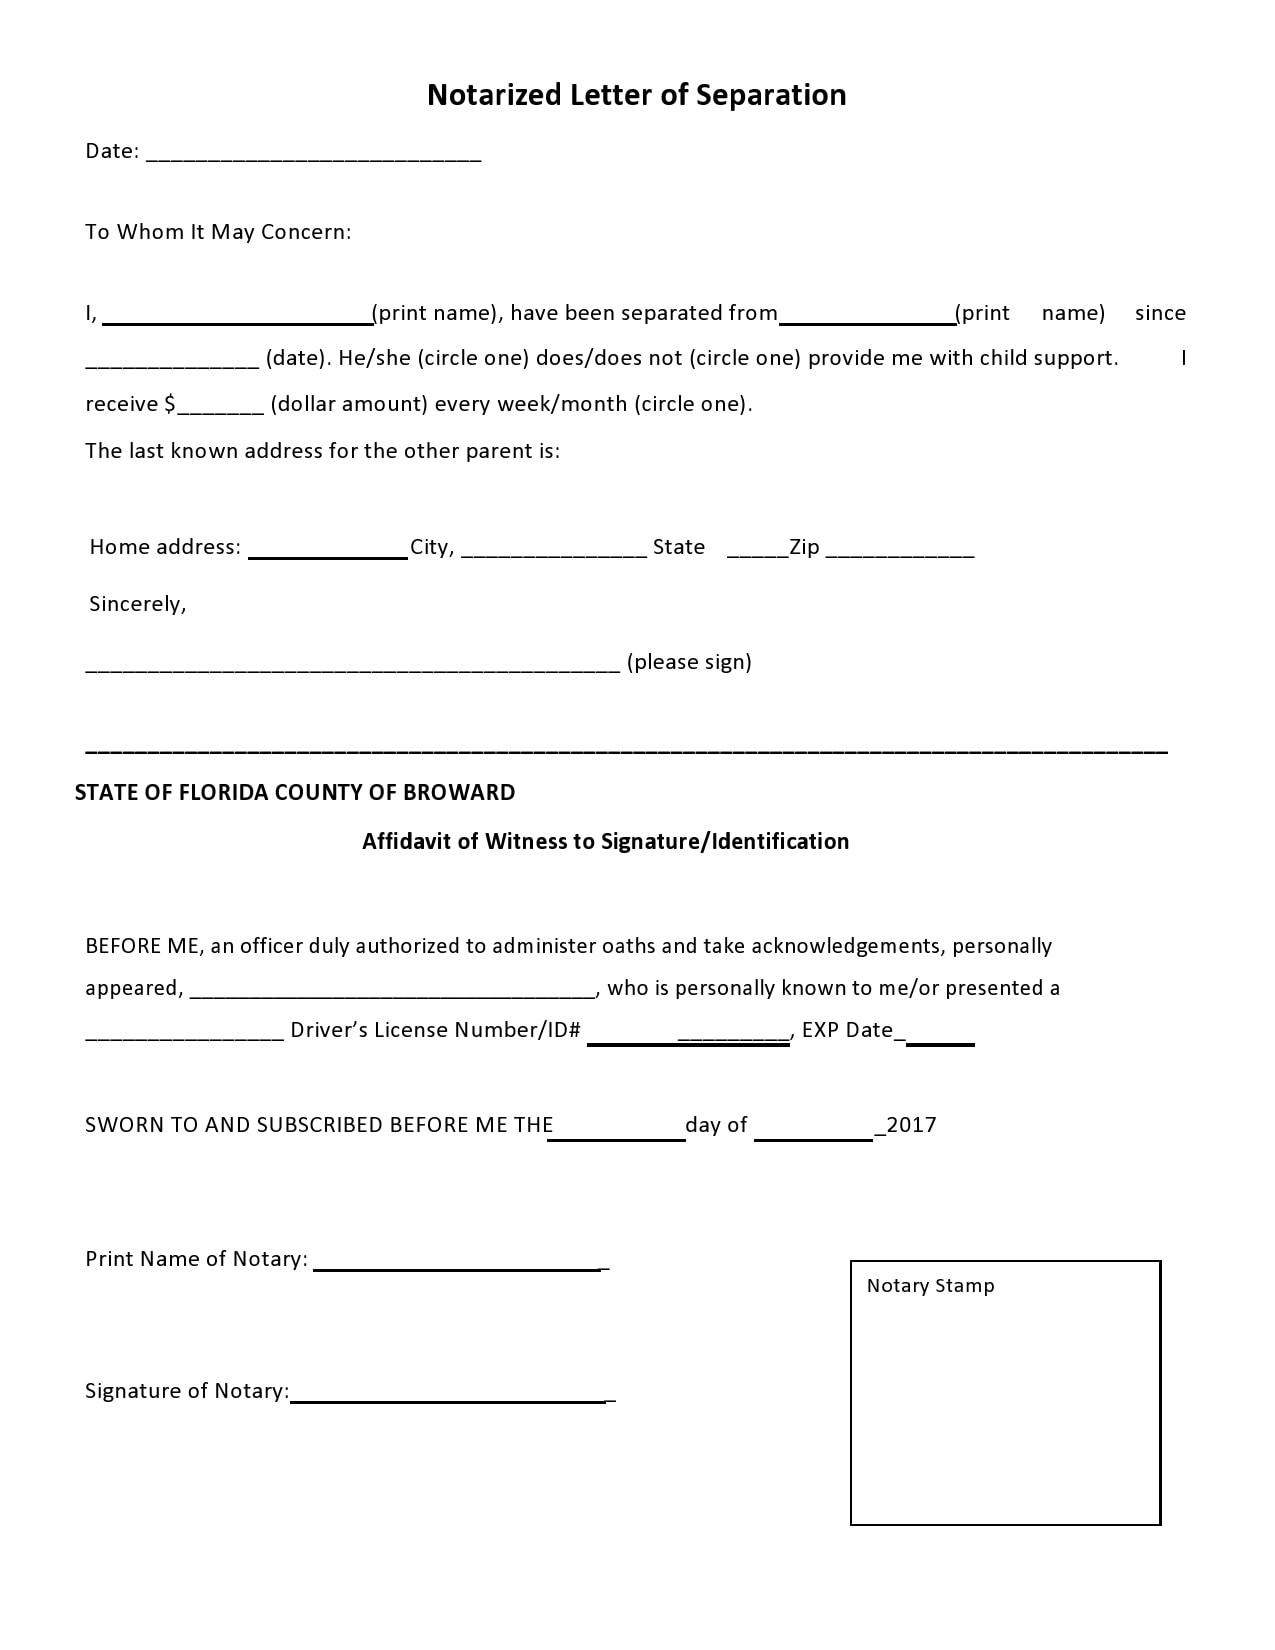 20 Free Notarized Letter Templates Notary Letters - TemplateArchive